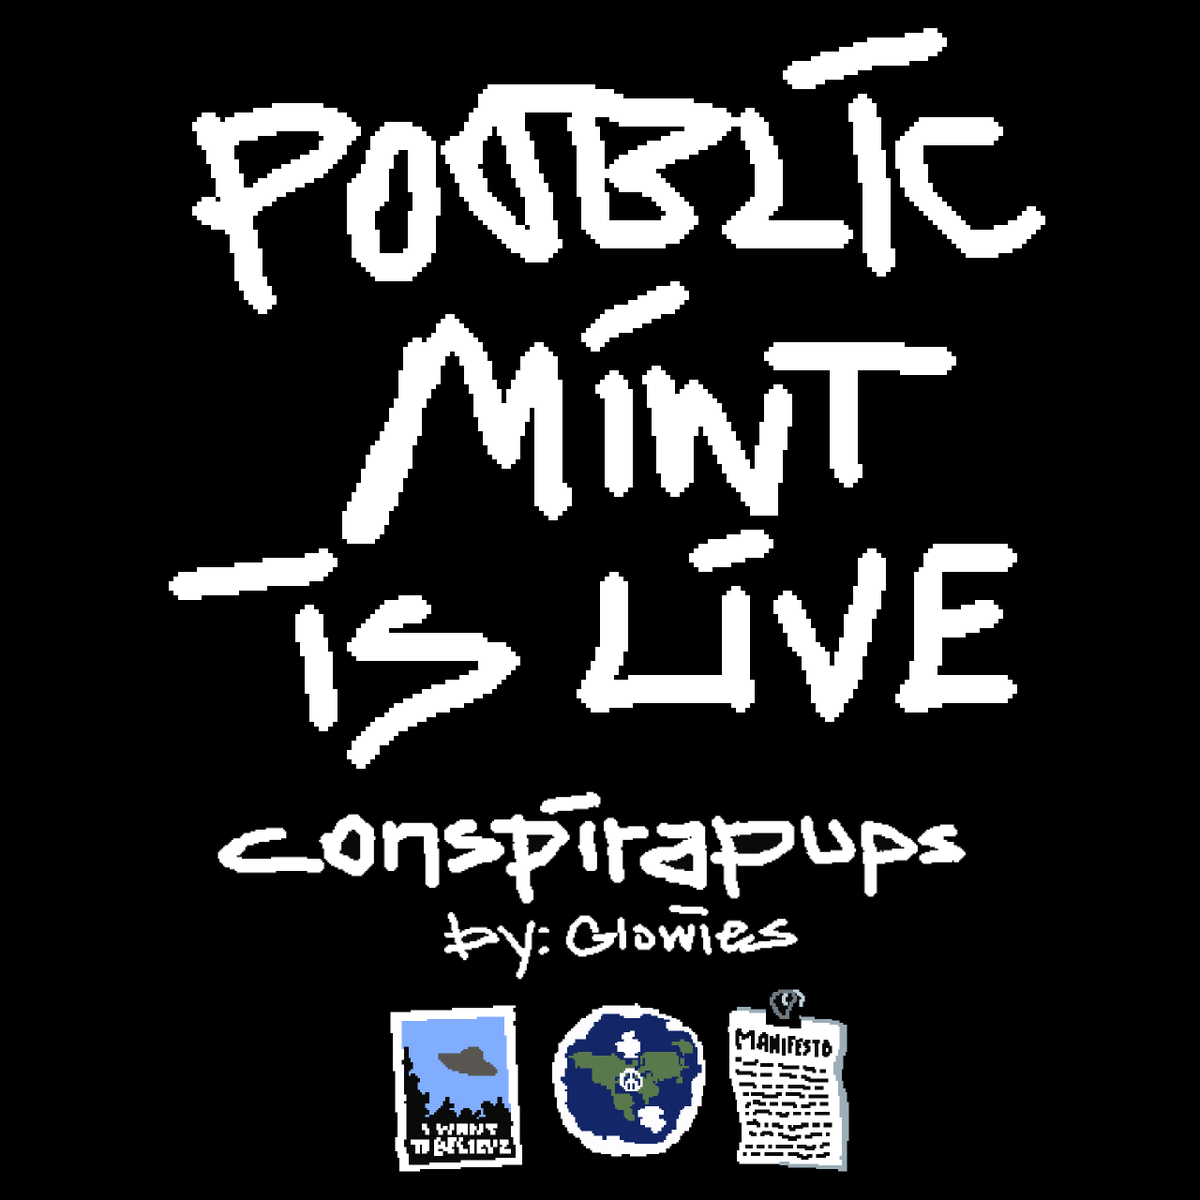 ---CLASSIFIED COMMUNIQUE---
Attention Operatives, Conspirapups is now live and accessible to the public. This ordinal, steeped in UFO lore, the paranormal, and conspiracy, awaits your engagement. Inscribe now. 

Mint exclusively on @ordinalgenesis: ordinalgenesis.xyz/mint/5322f0add…